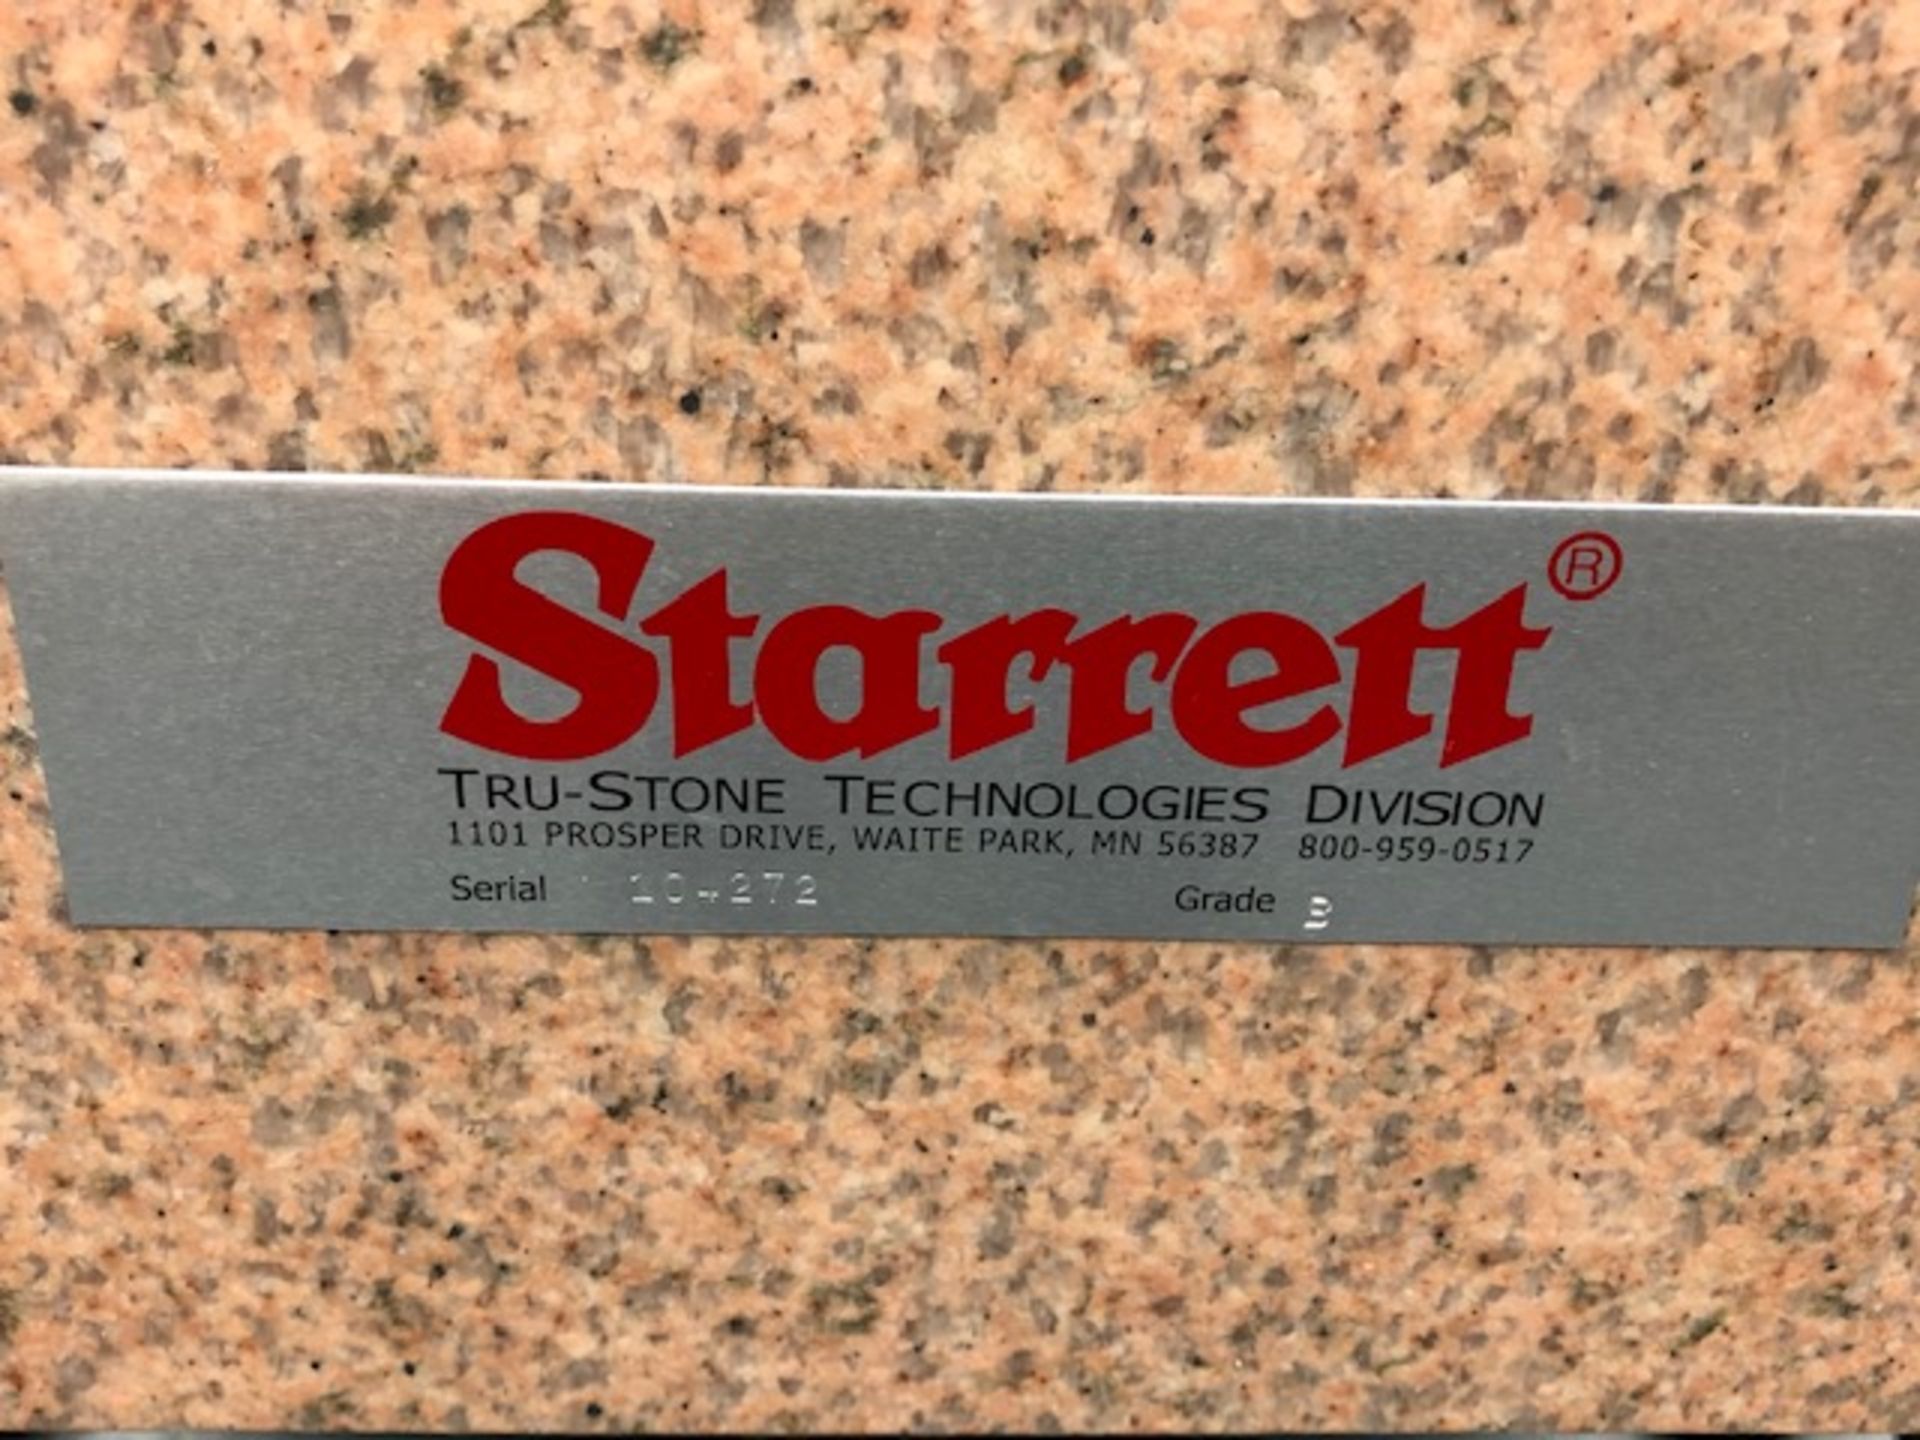 Starrett 4'x6' Grade 3 Pink Surface Plate with Stand & Cover (new) - Image 3 of 4